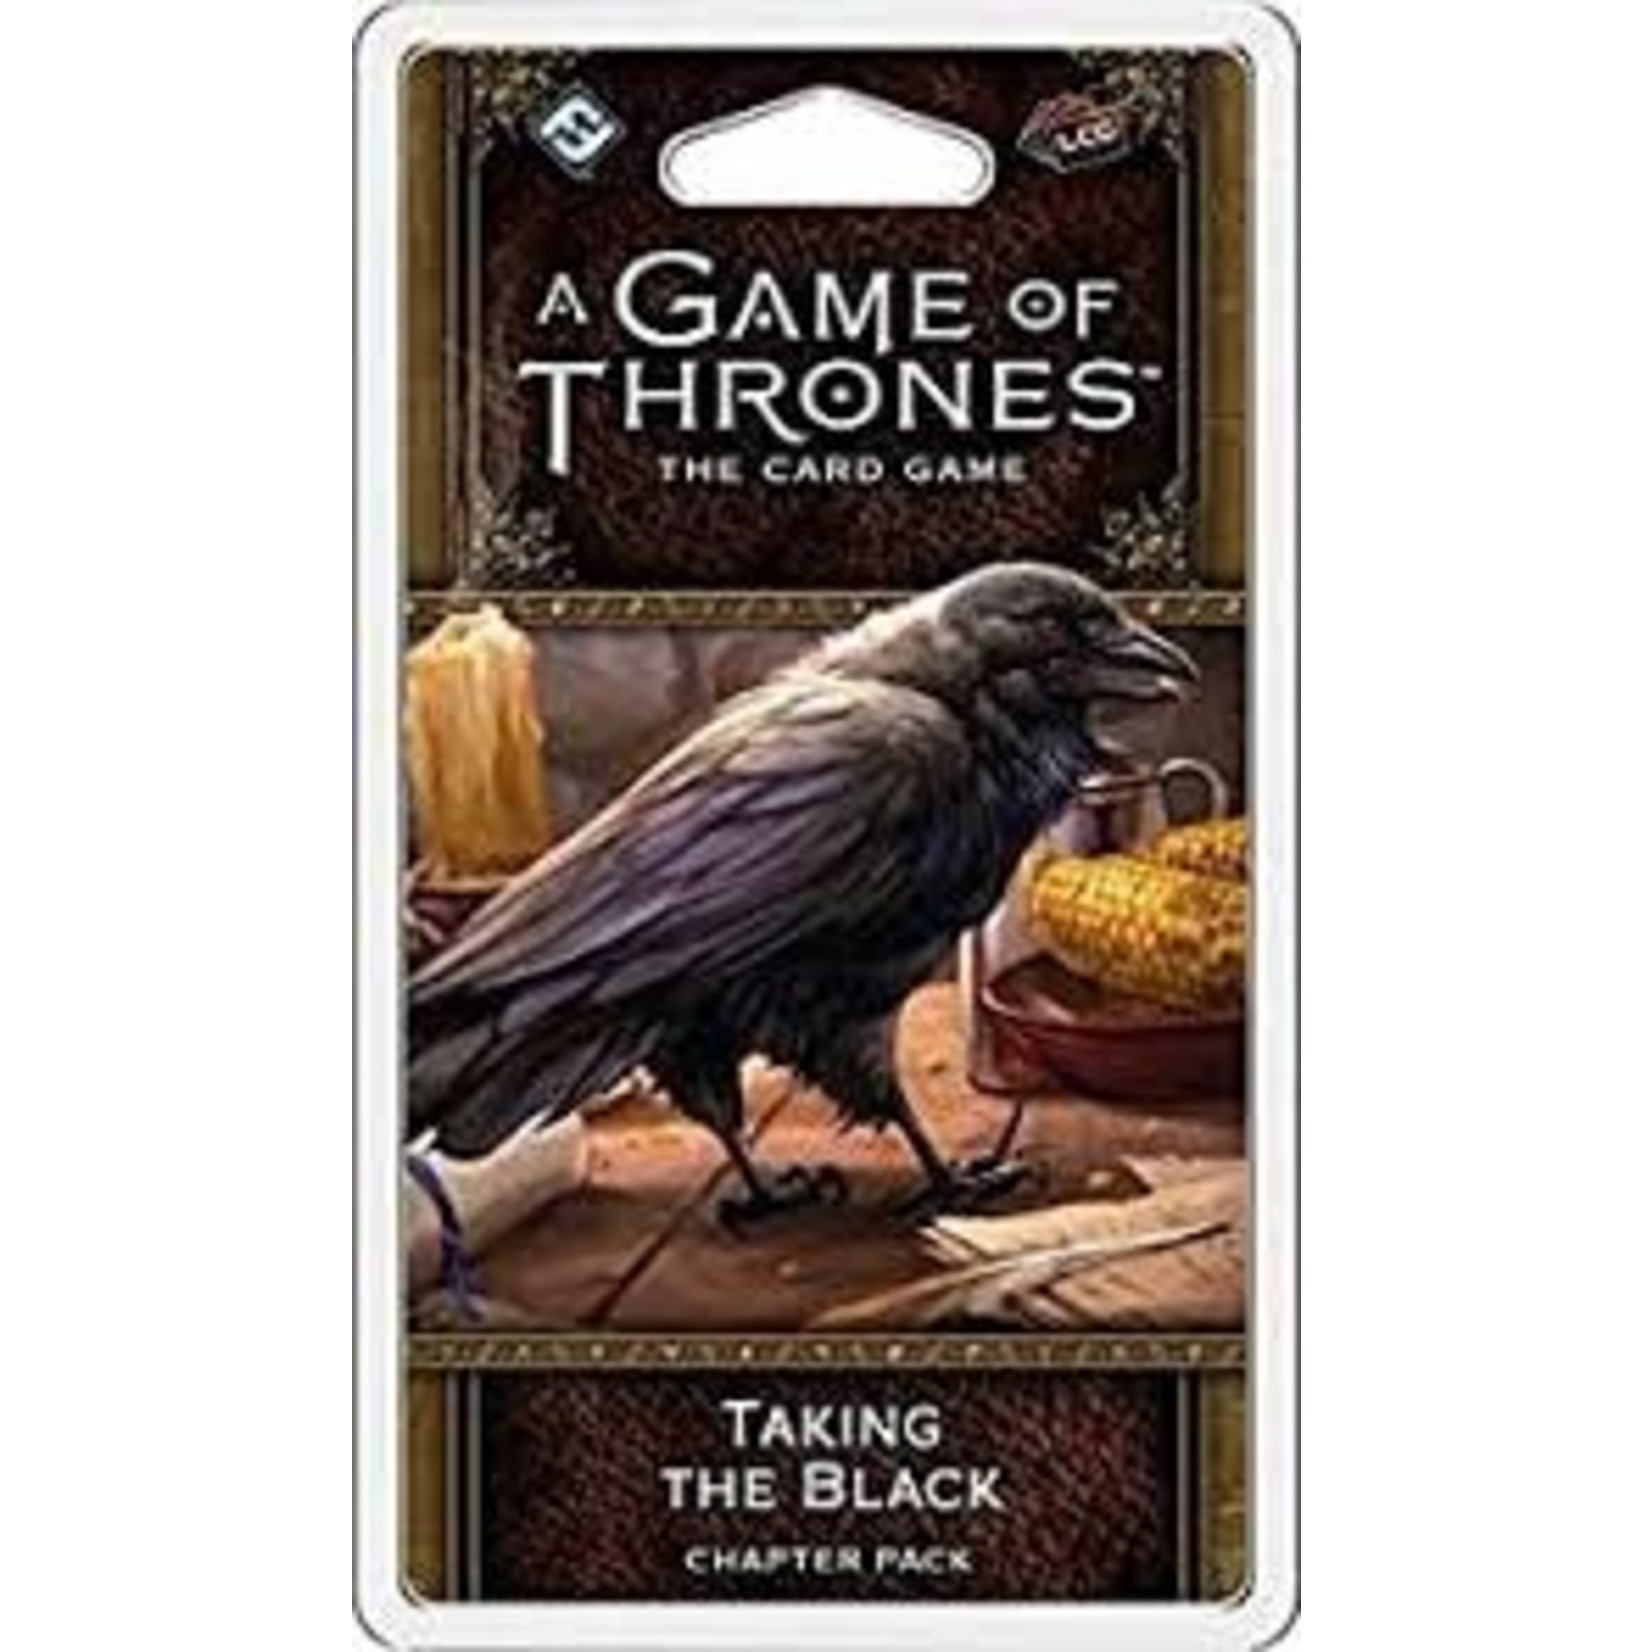 A Game Of Thrones 2E LCG: Taking the Black - Westeros Cycle Chapter Pack